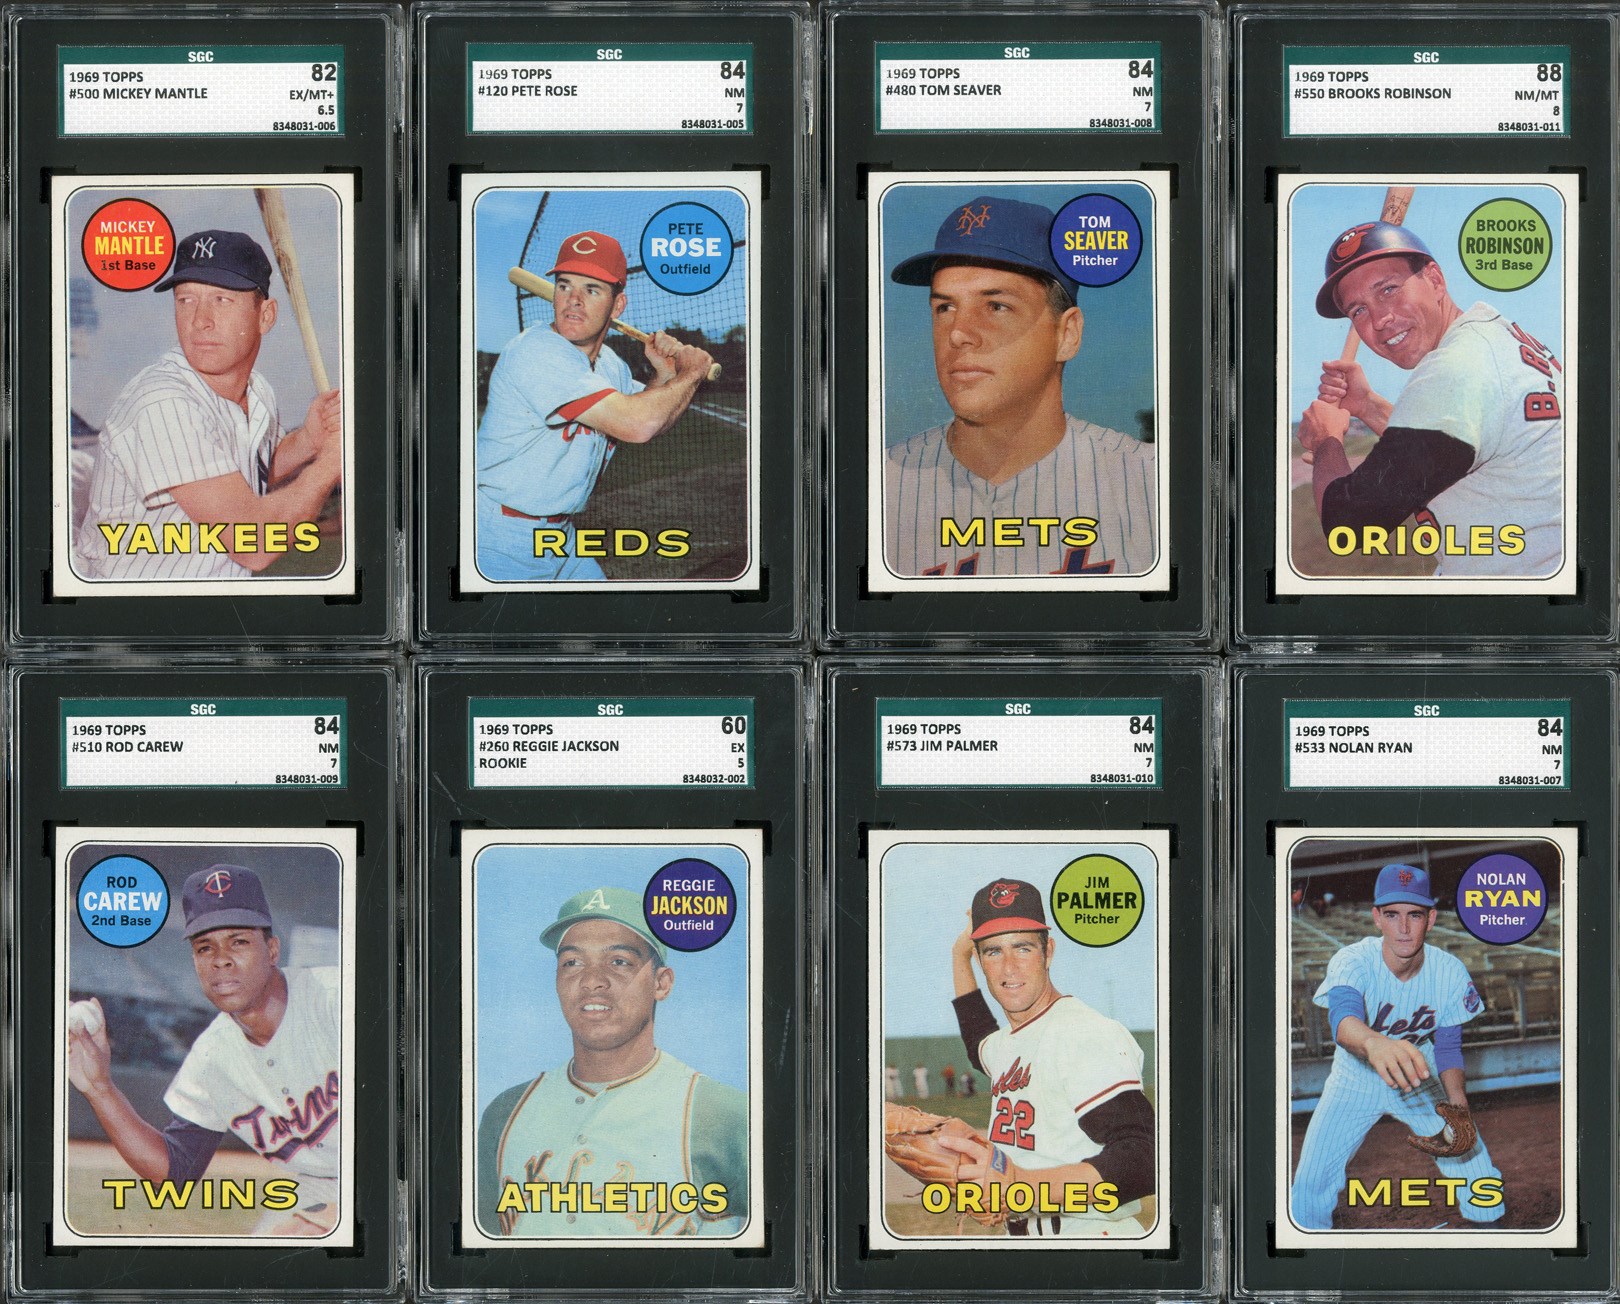 - 1969 Topps Complete Set (664 Cards - 8 SGC Graded)